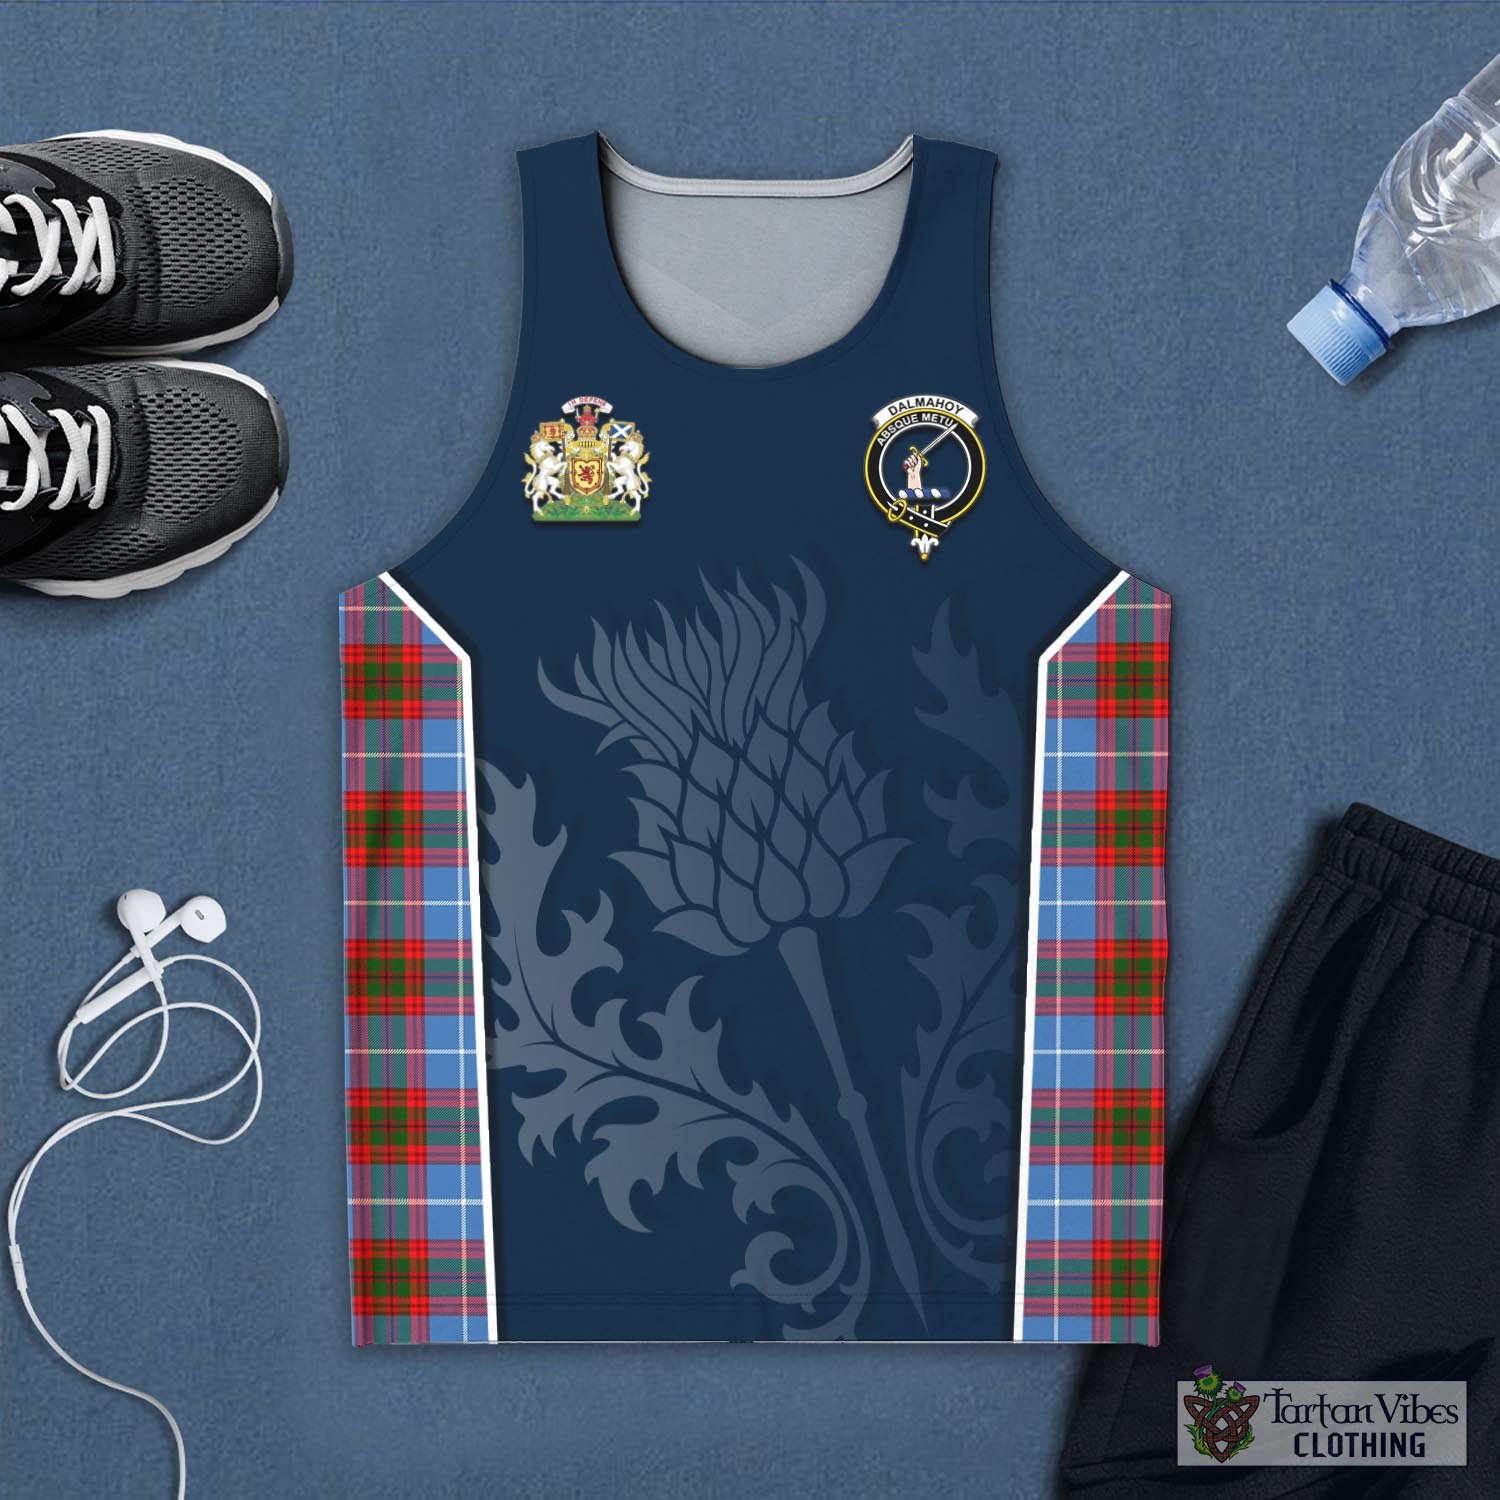 Tartan Vibes Clothing Dalmahoy Tartan Men's Tanks Top with Family Crest and Scottish Thistle Vibes Sport Style